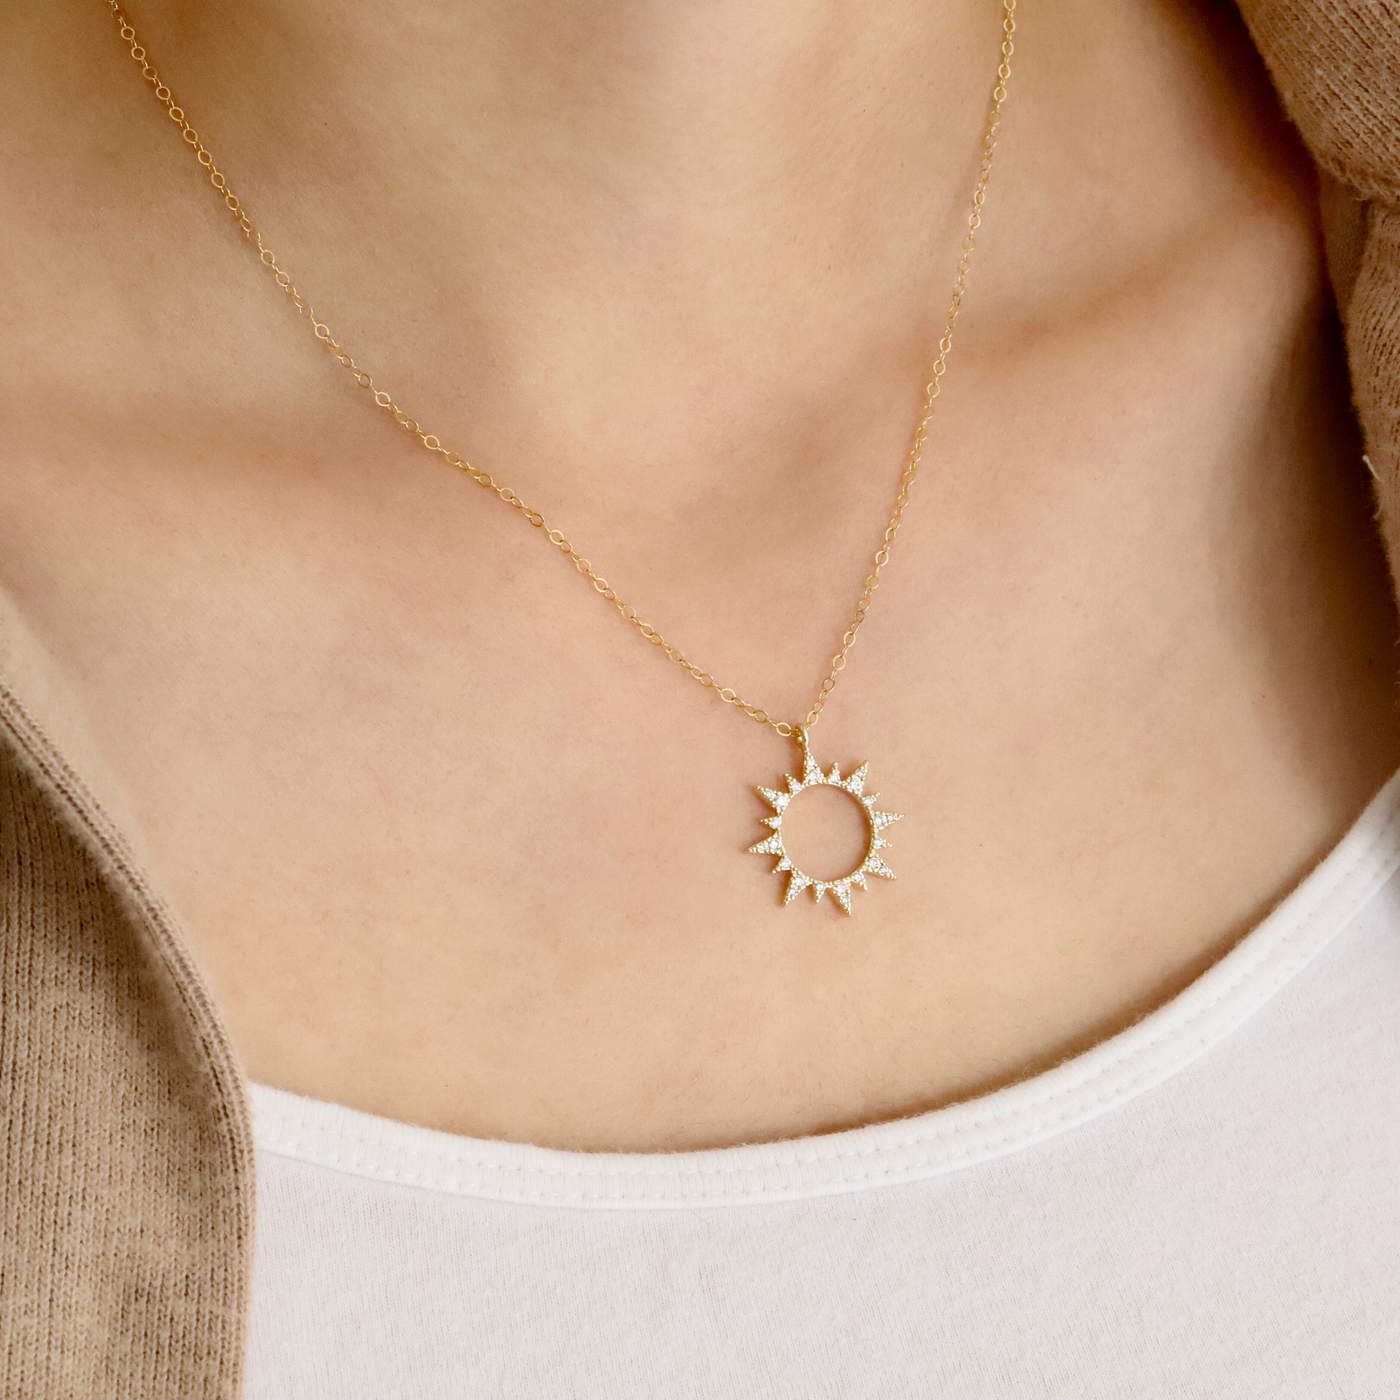 14K gold filled necklace with gold plated sunflower pendant